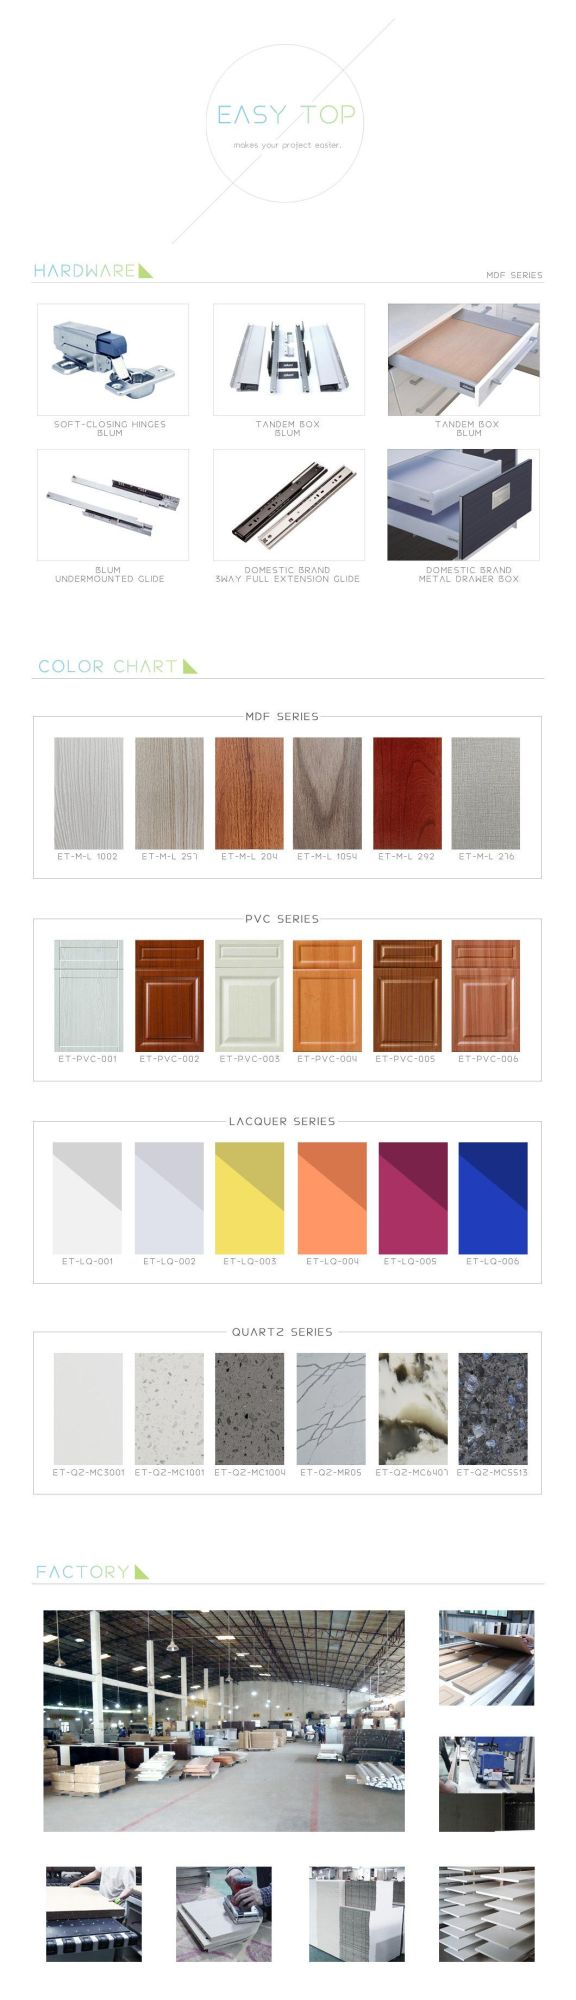 L-Shaped Wood Grain Dirty Proof Wall Cupboard Modern Furniture Customized Design Tailor-Made Kitchen Cabinets